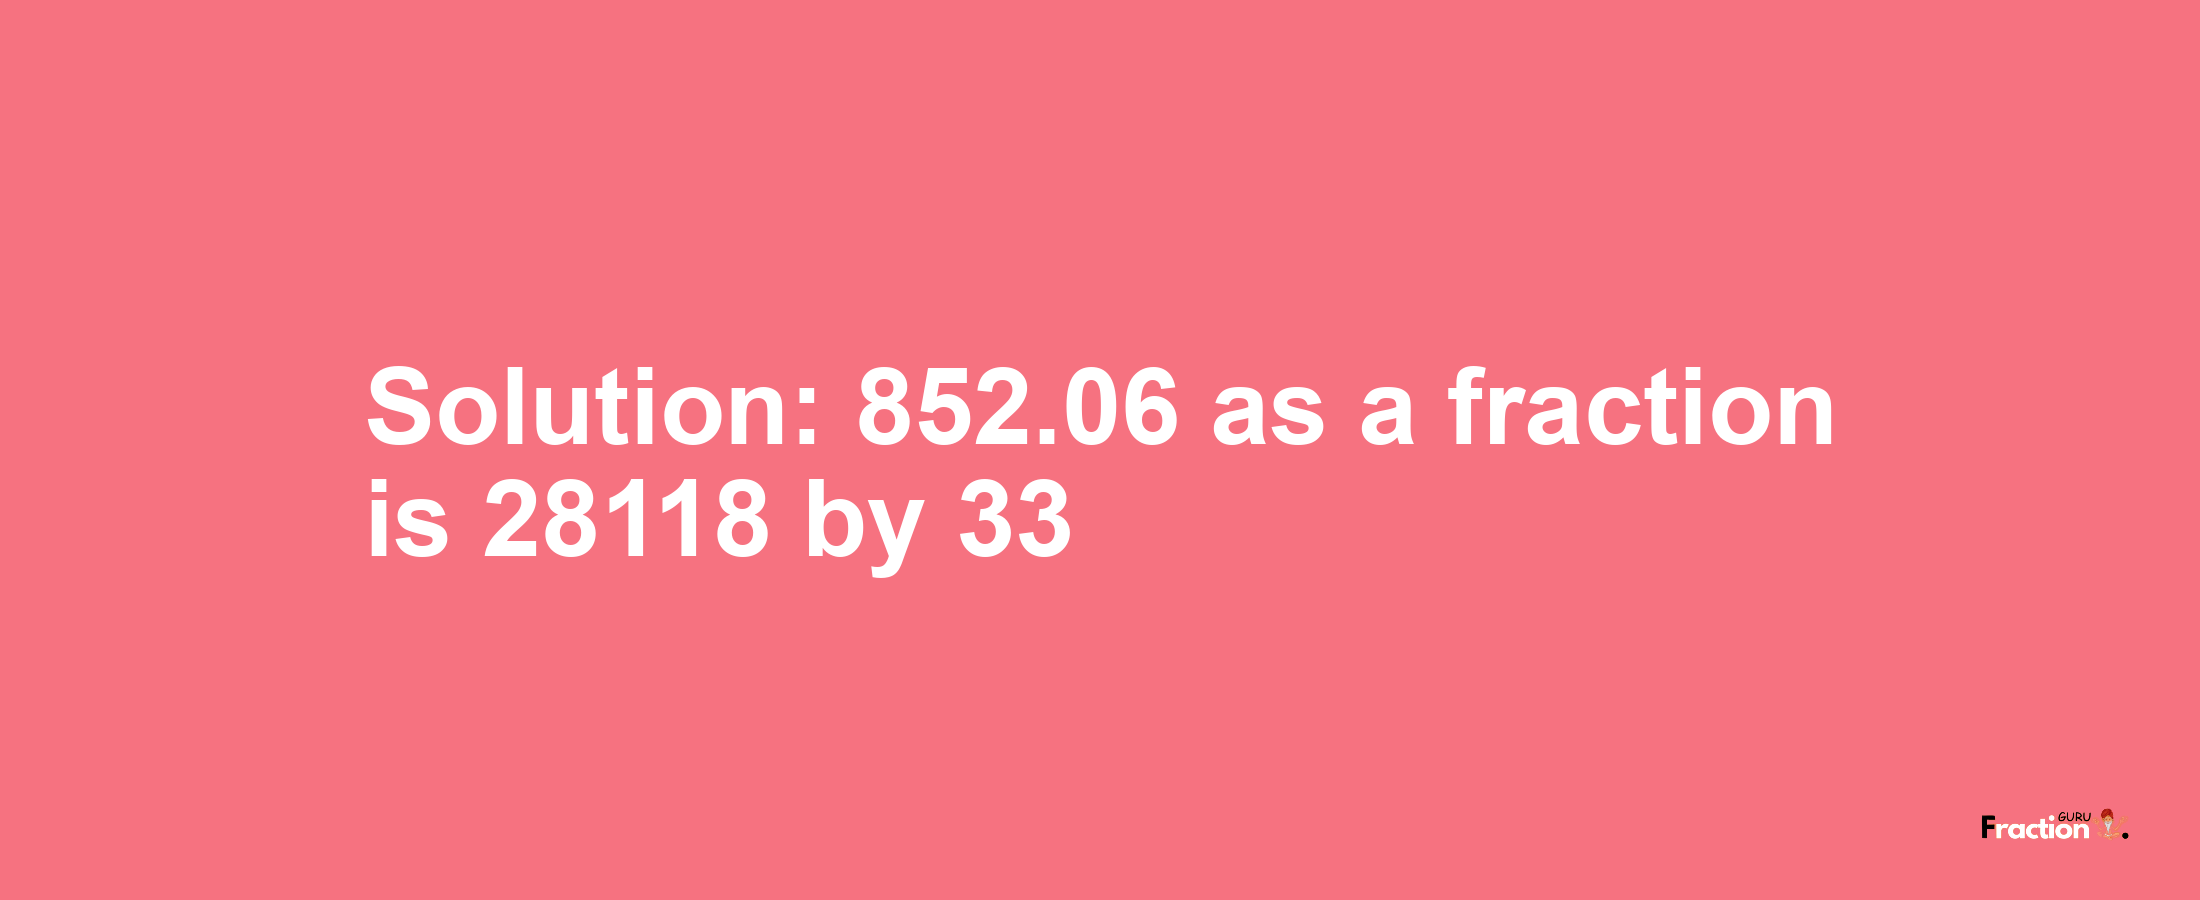 Solution:852.06 as a fraction is 28118/33